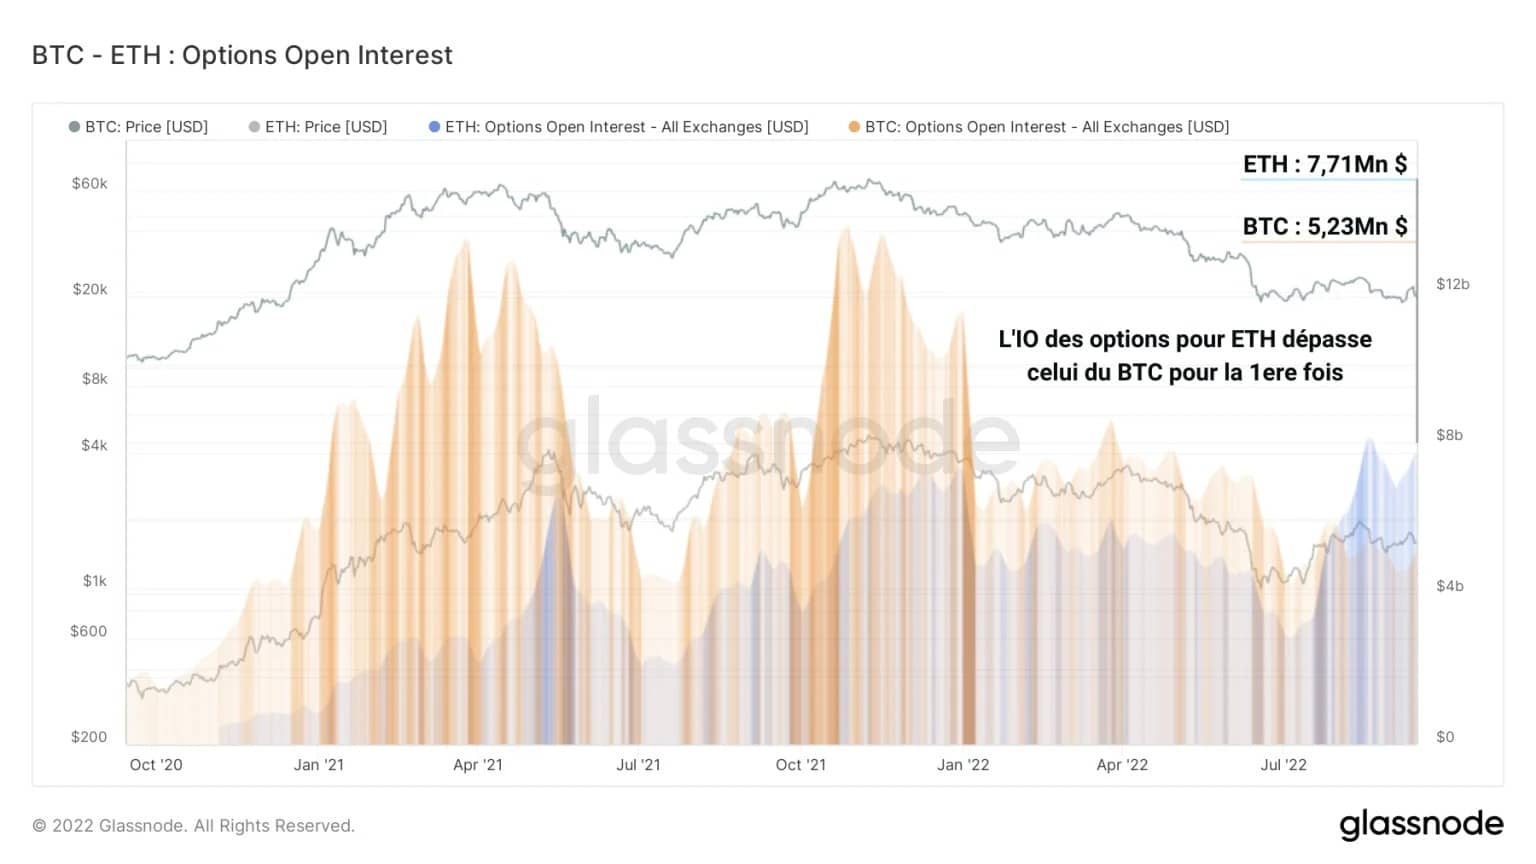 Figure 5: Open Interest Options for BTC and ETH